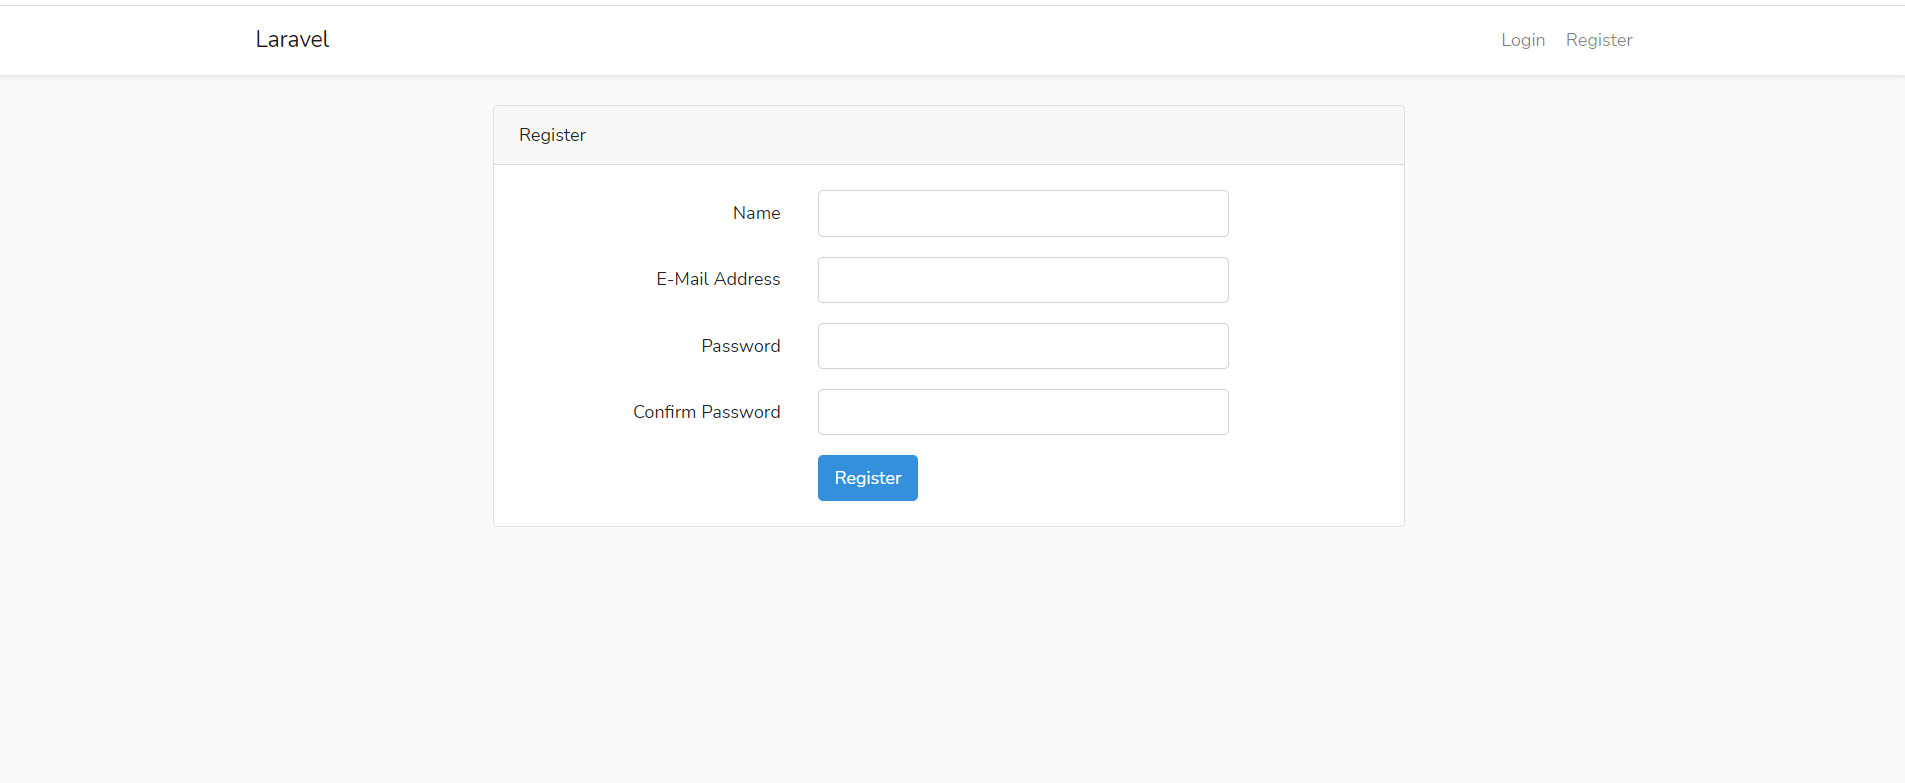 Private auth. Login register. Ангуляр-ларавел. Register Page. Auth close.